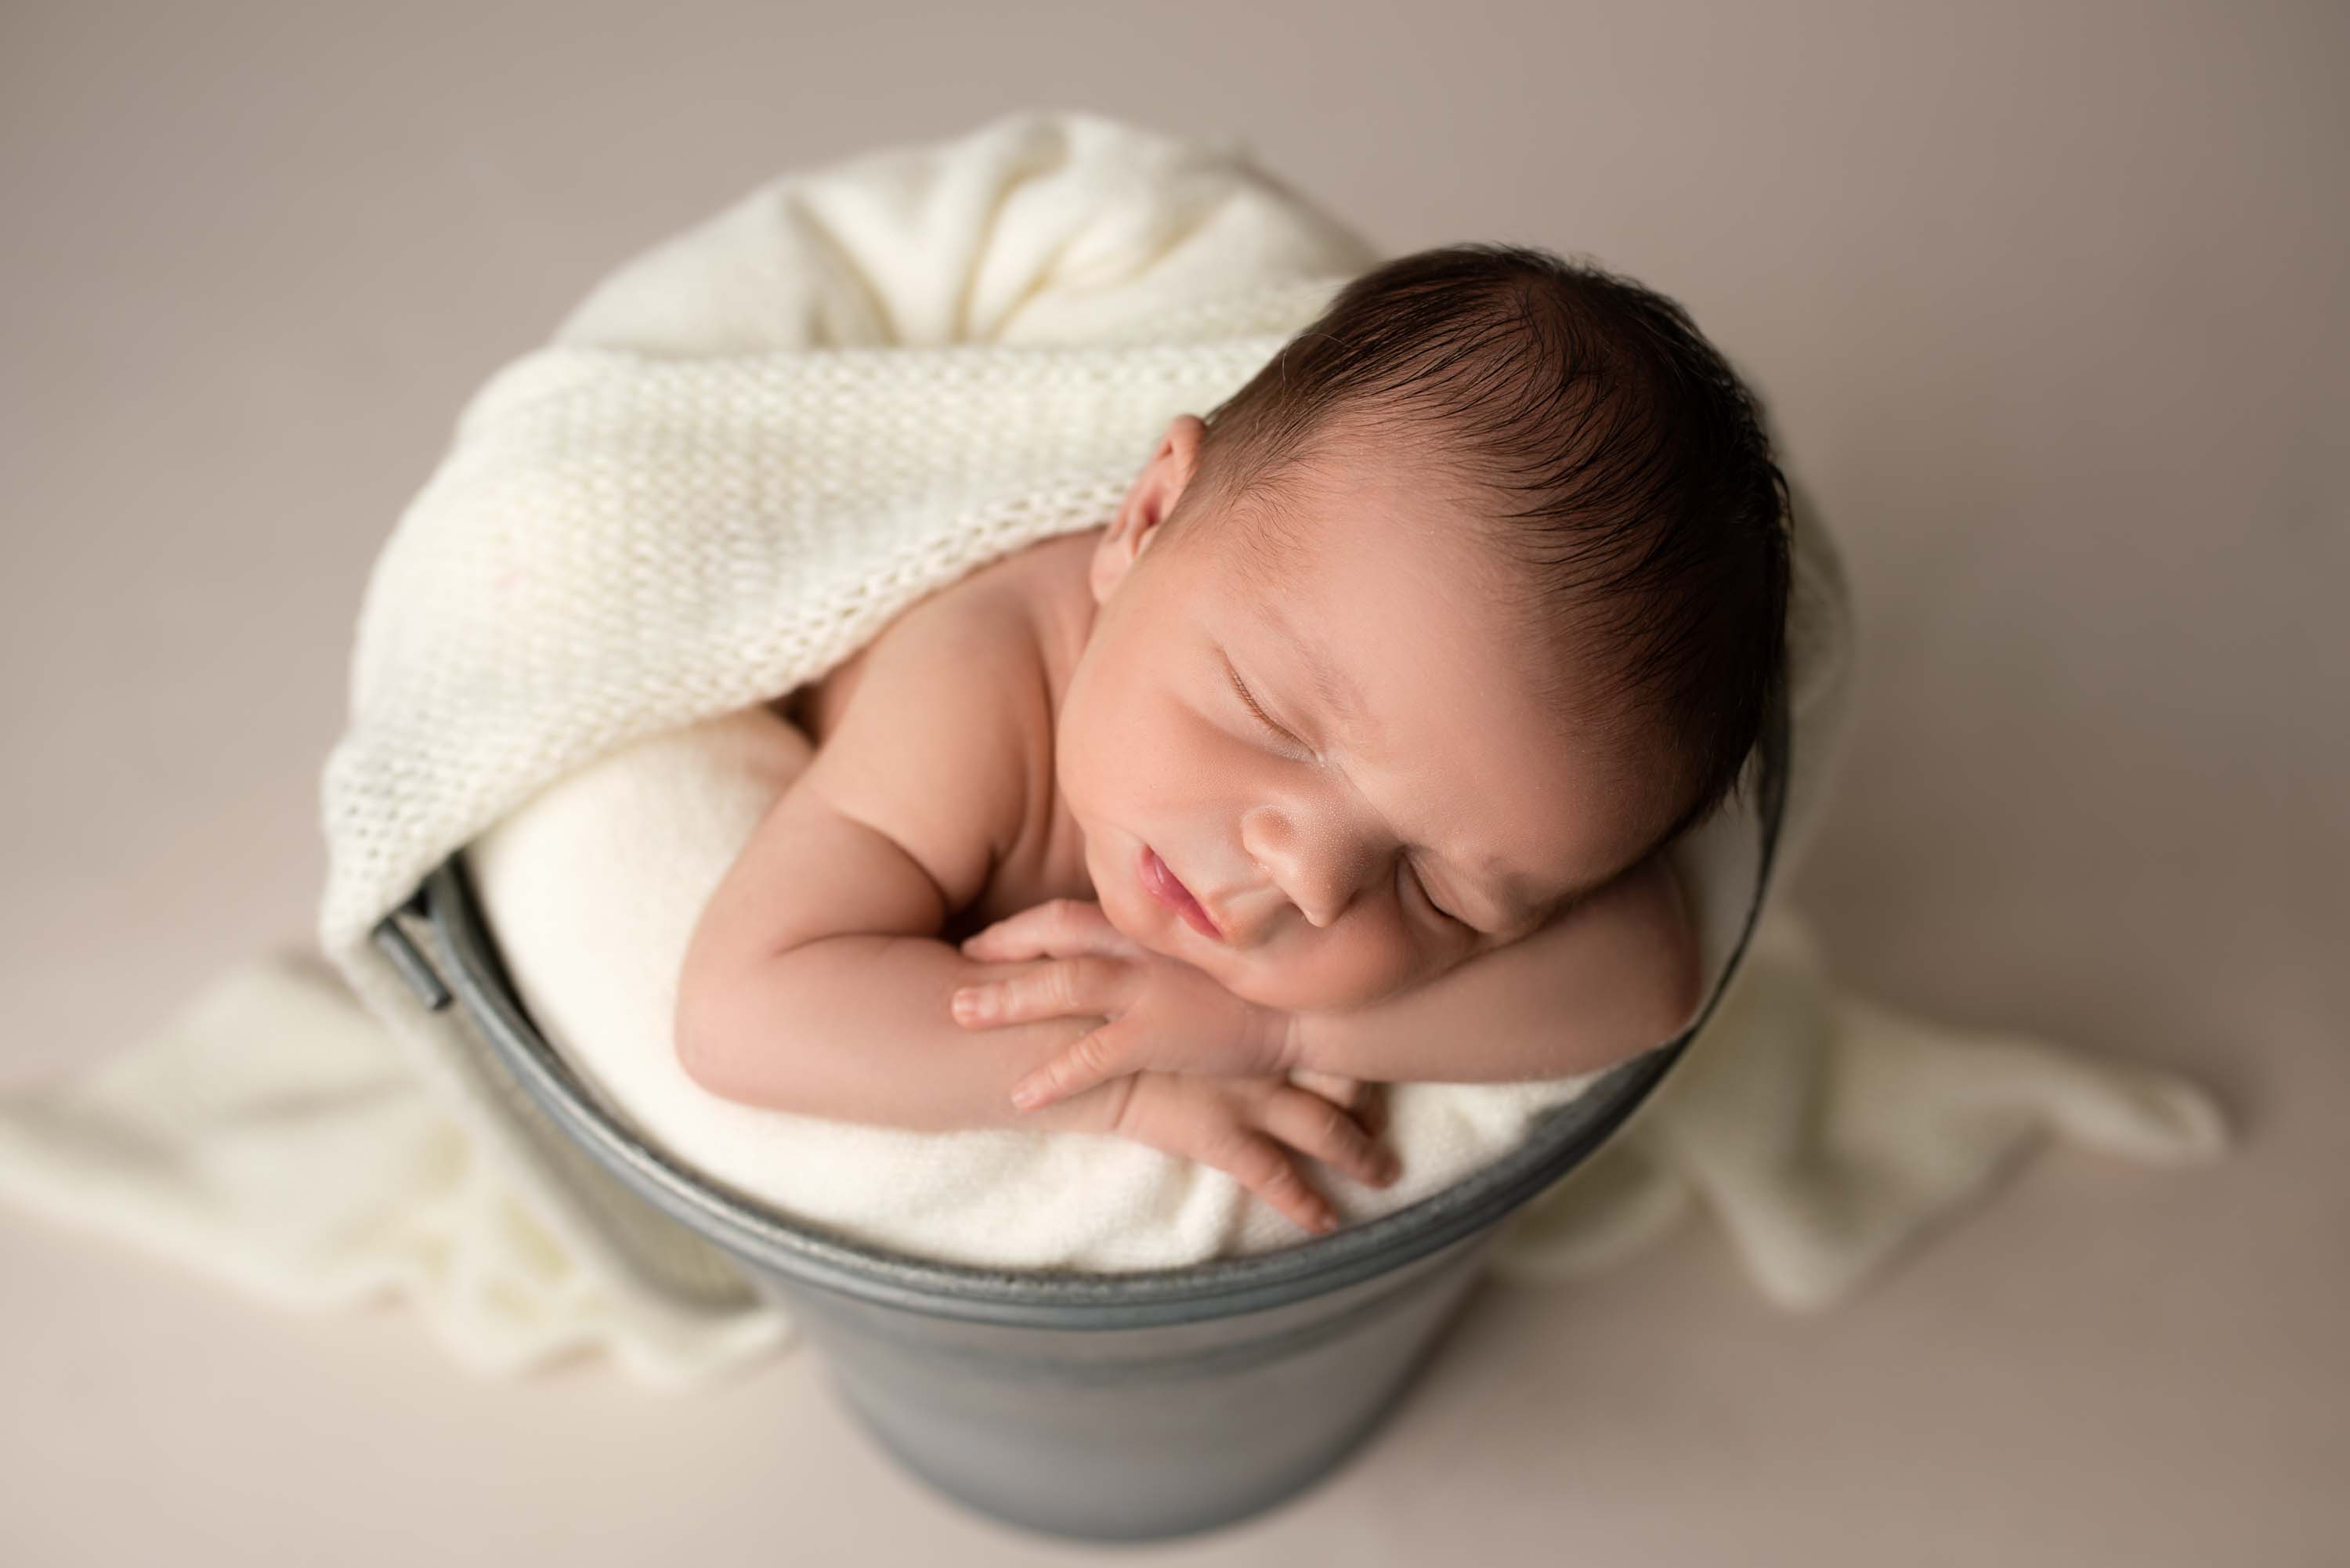 Newborn boy asleep in a metal bucket photographed from above